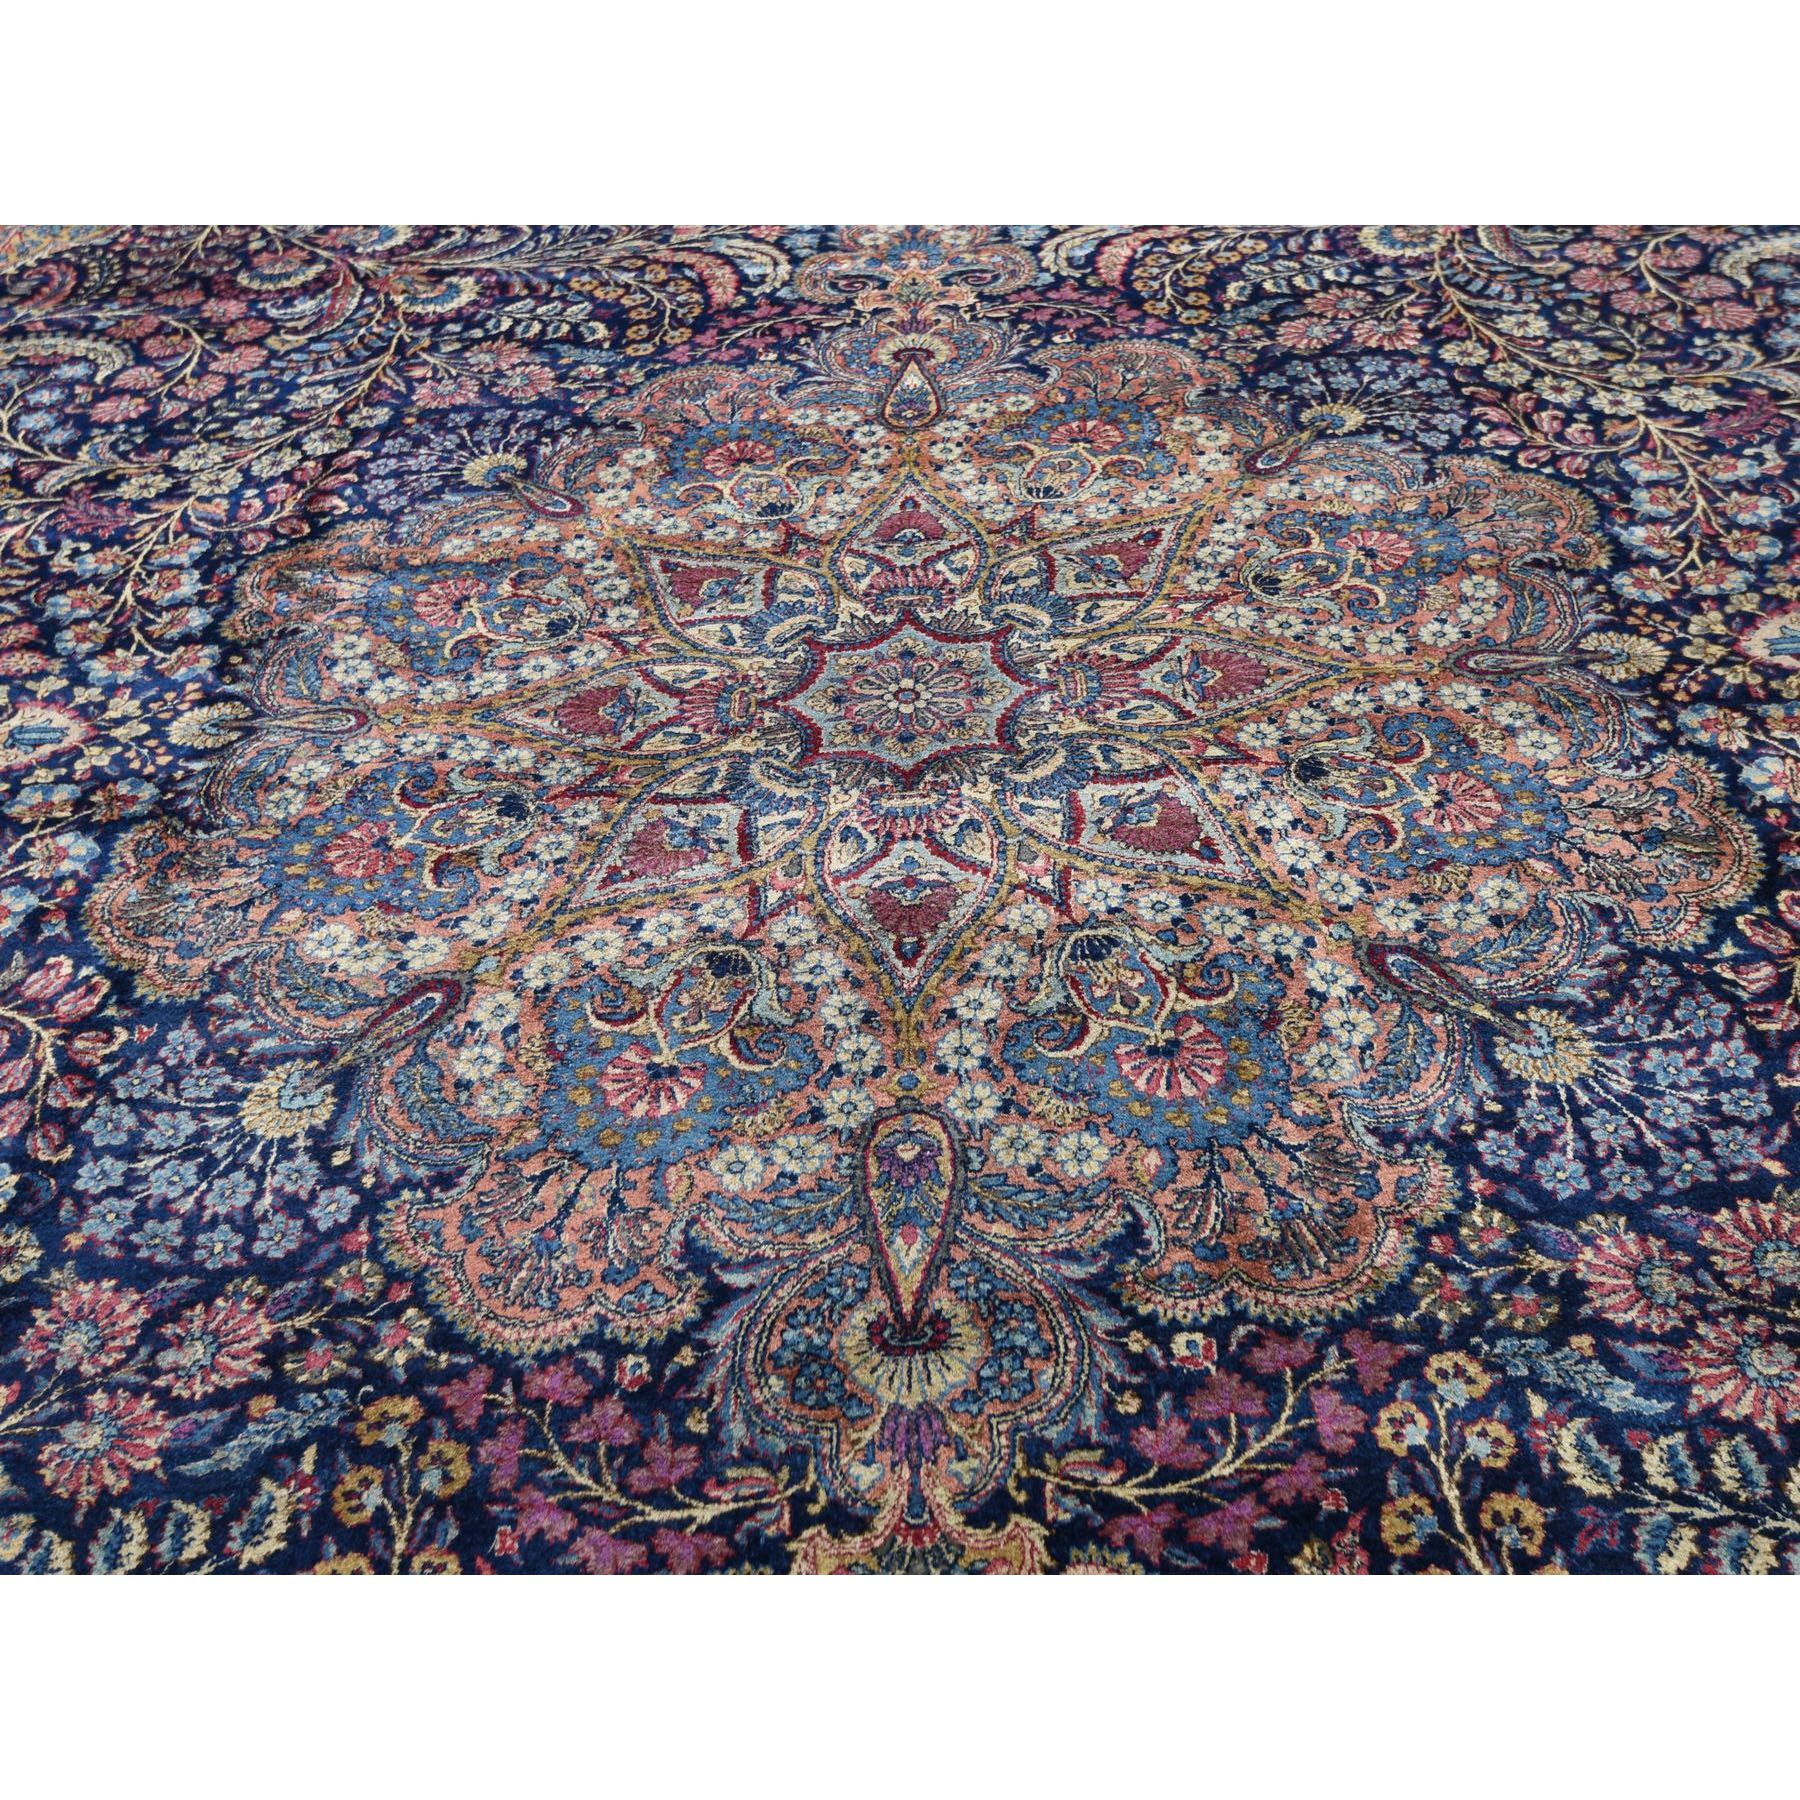 13-4 x19-7  Oversized Antique Persian Kerman Full Pile And Soft Hand Knotted Oriental Rug 